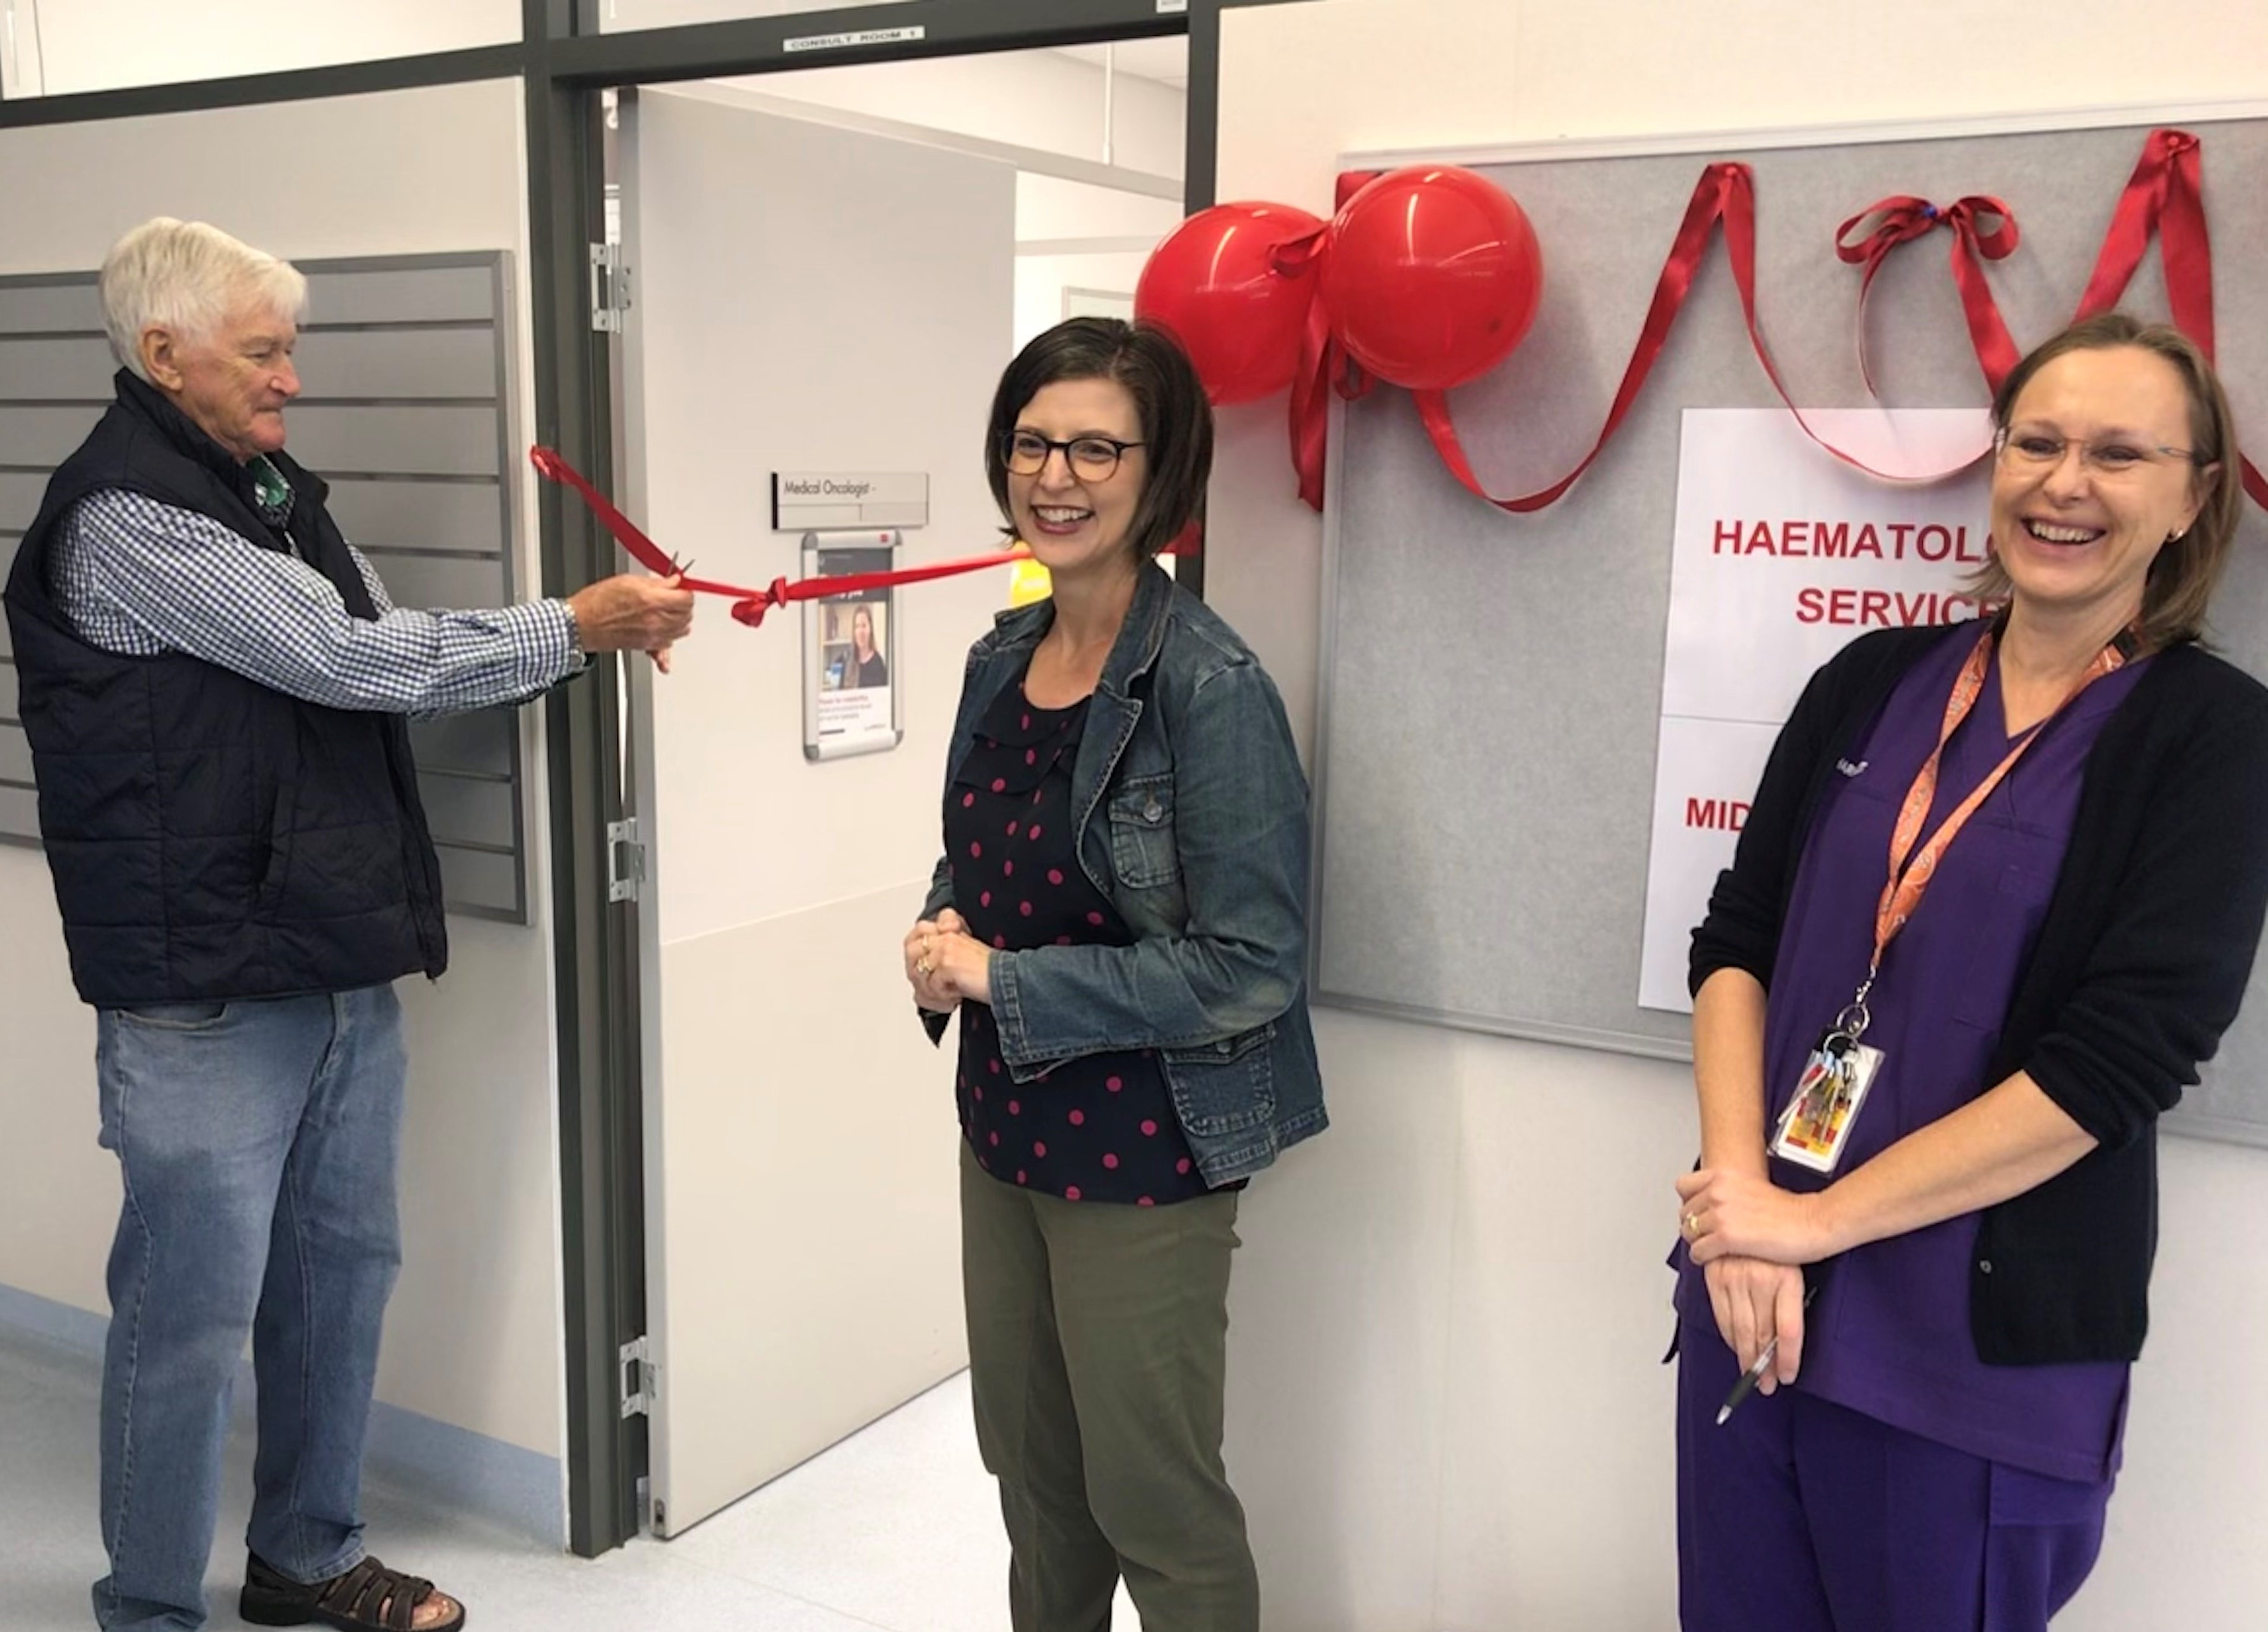 Patient John cuts the ribbon opening  Midwest Haematology with Dr Rebecca Howman and Clinical Pharmacist Nicky Goslin smiling and looking on.